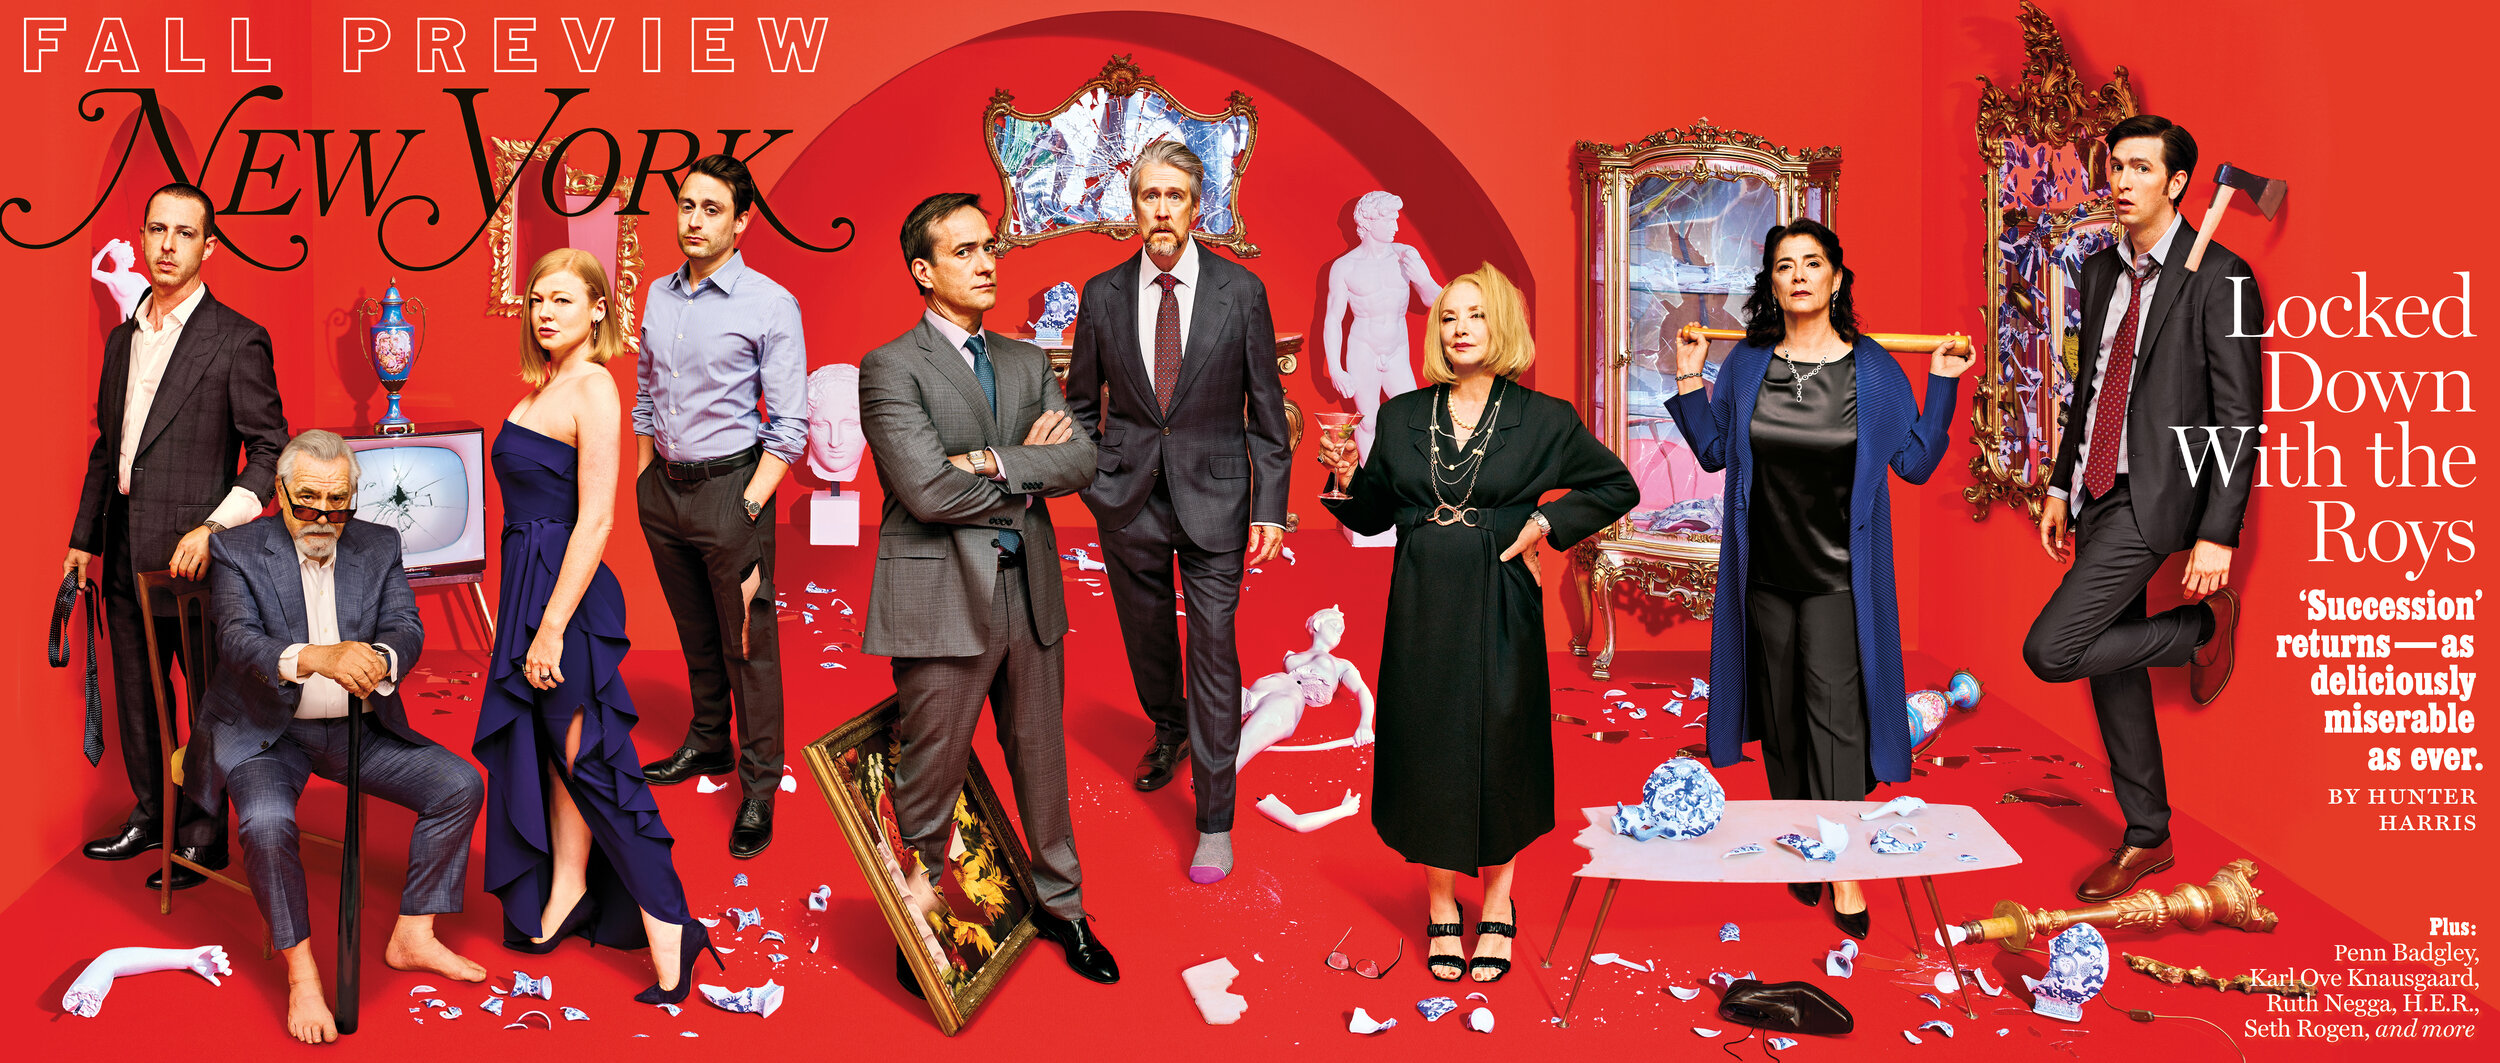   Maurizio Cattelan and Pierpaolo Ferrari  photographed the cast of Succession for New York Magazine’s 2021 Fall Preview cover. See the story  here .  